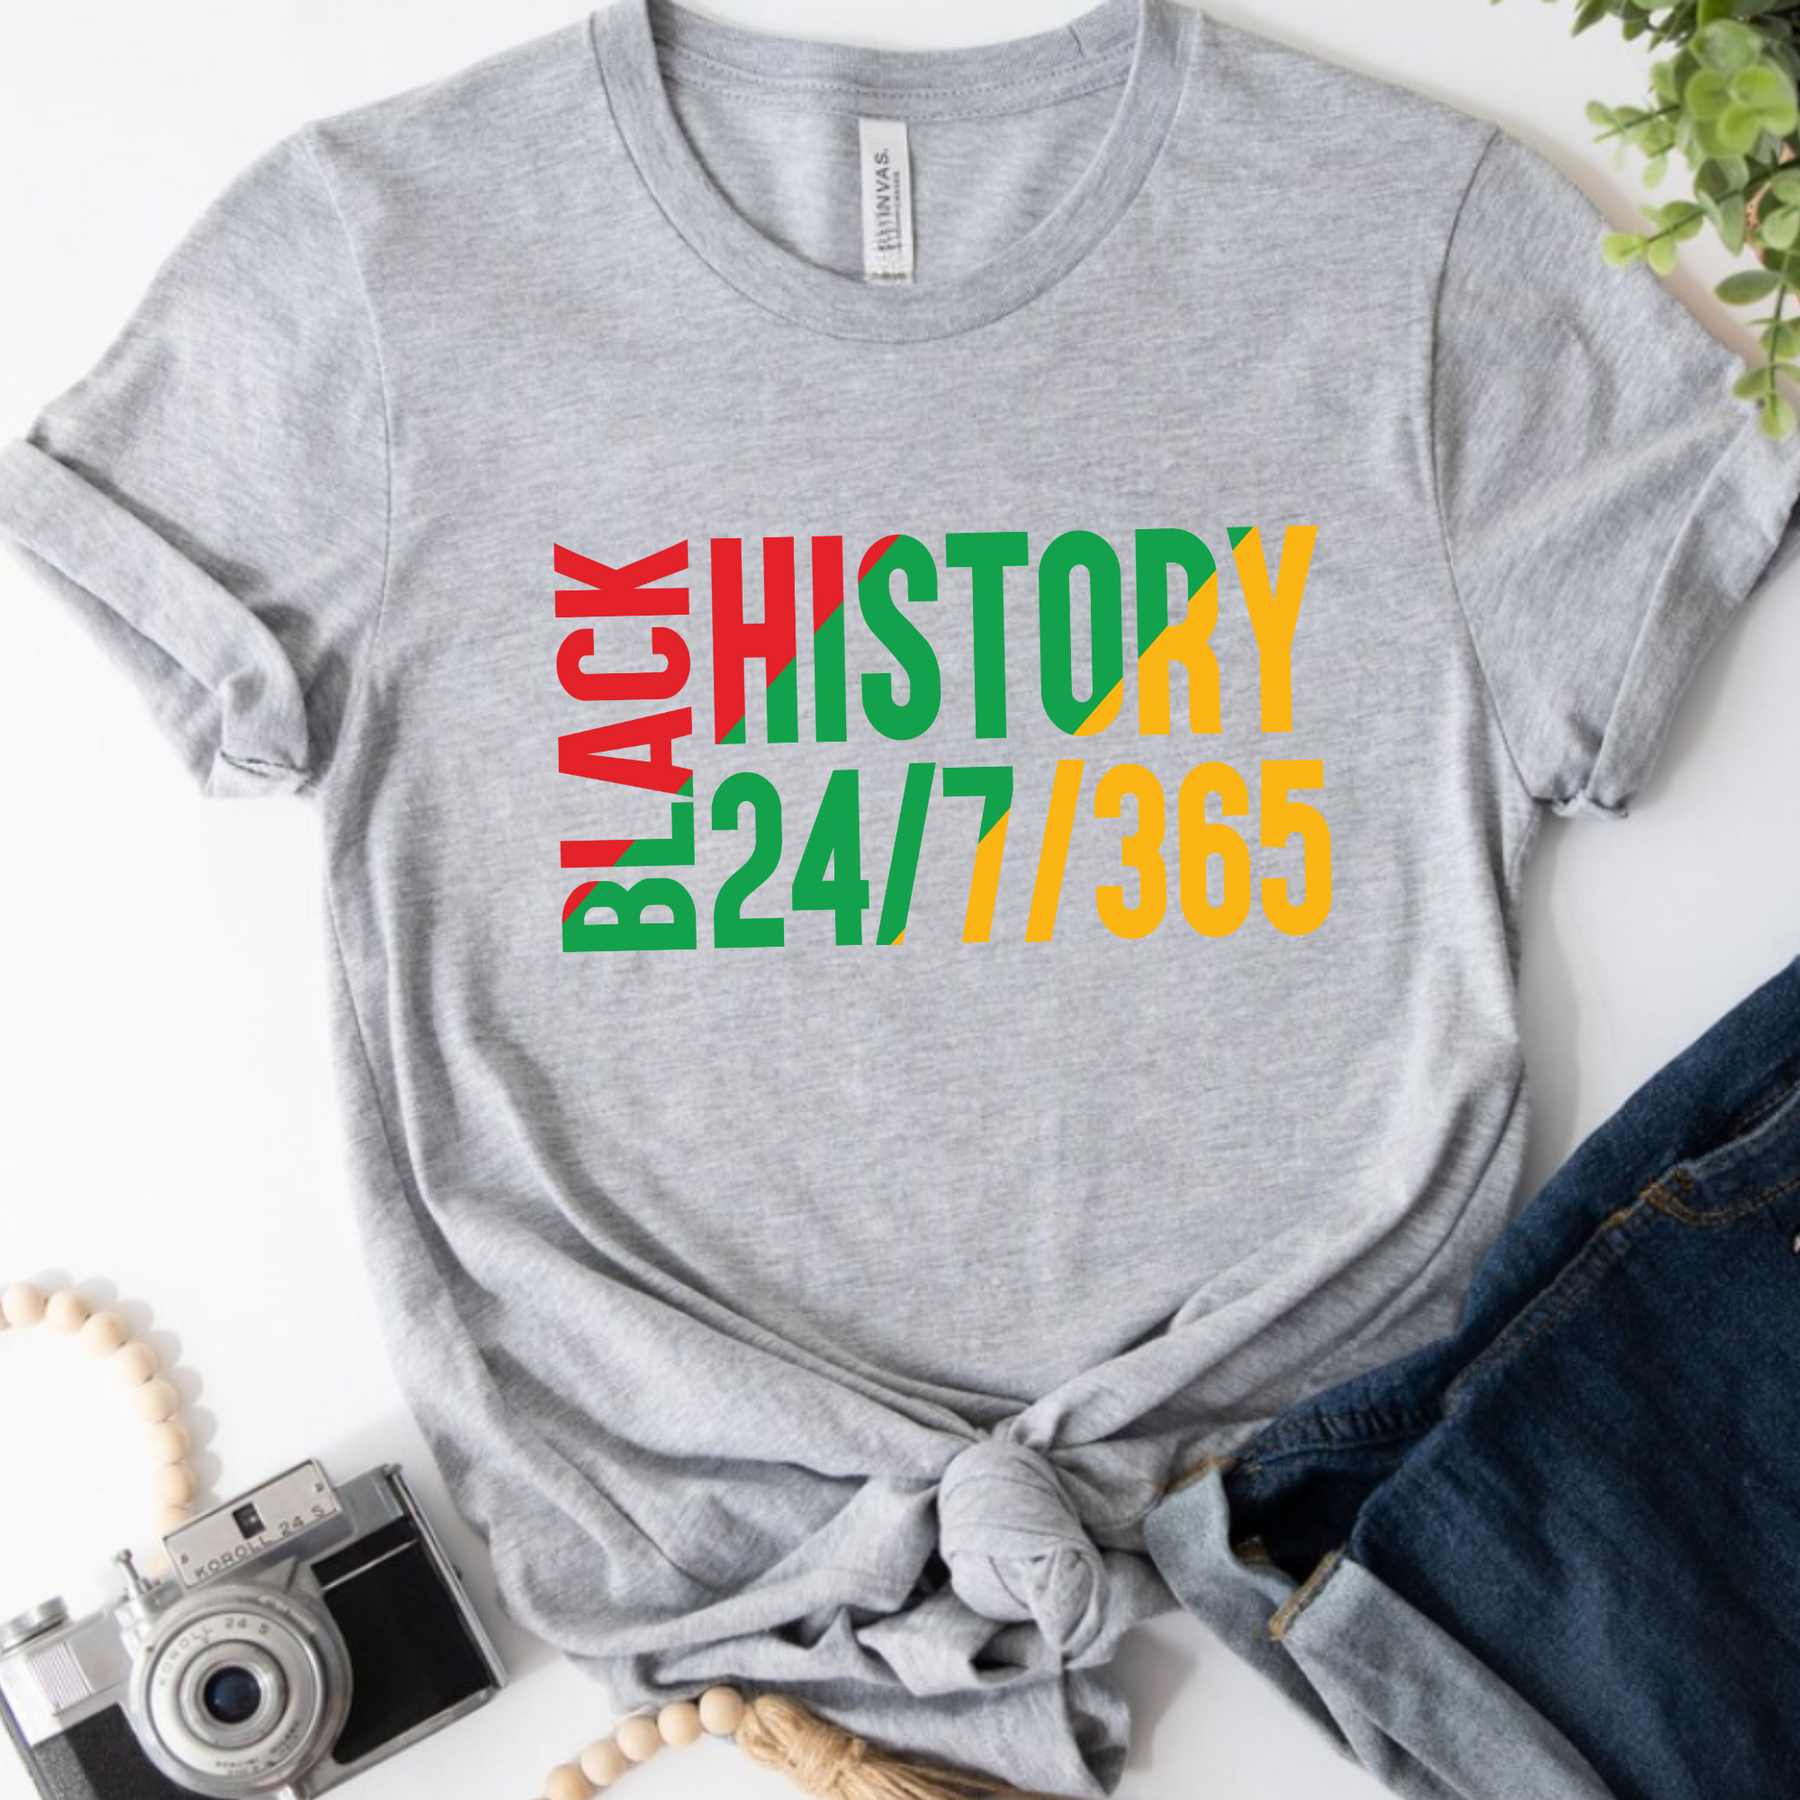 Black History Every Day T-Shirt - Black Culture Tee